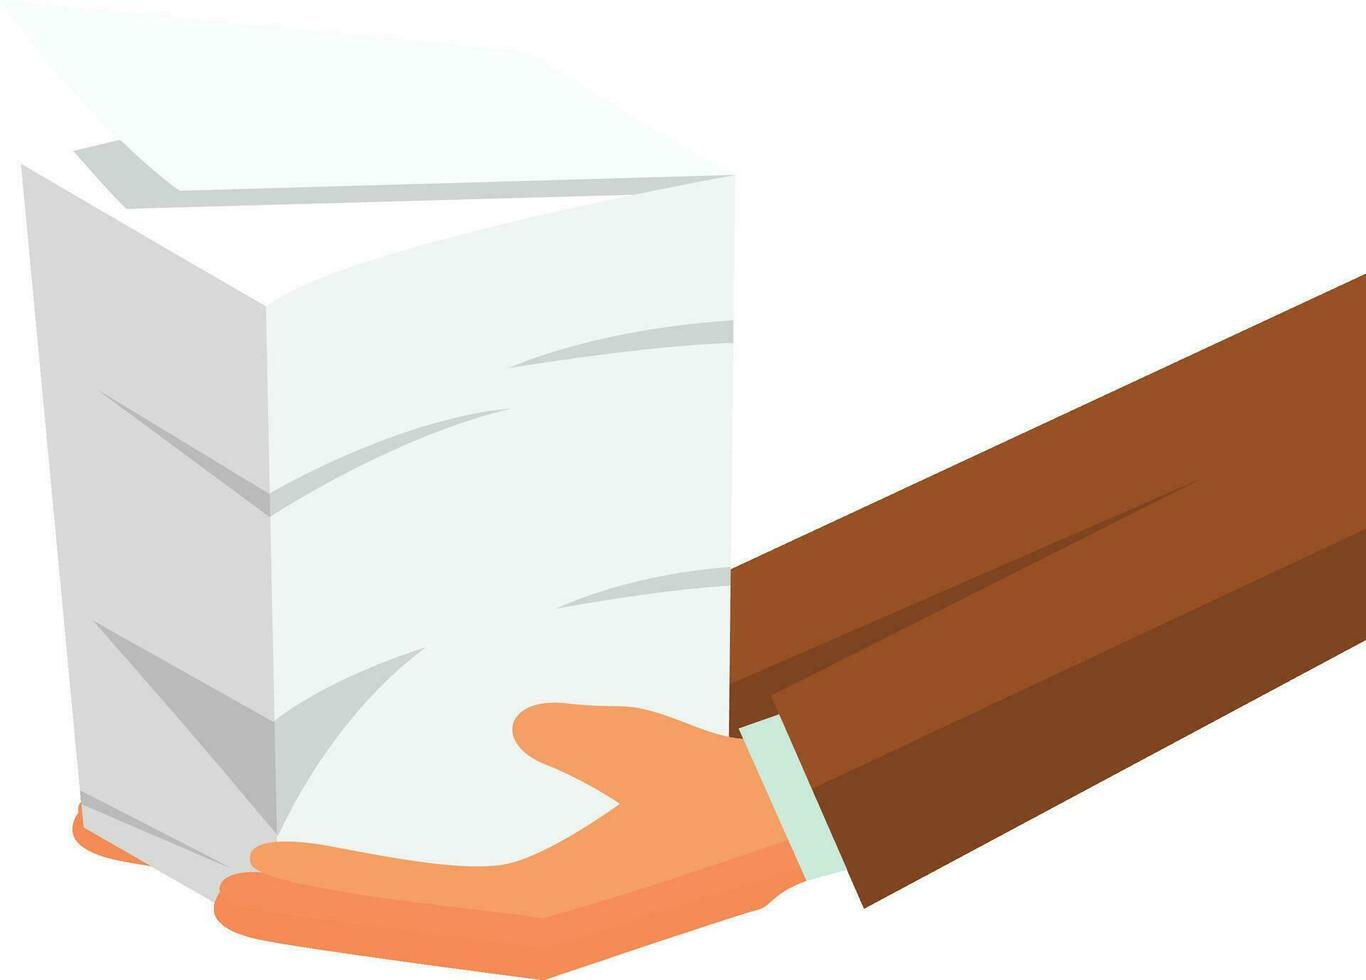 Hand holding a pile of papers or set of stationeries Vector illustration, Flat background with papers, Paperwork and office routine, documents Workspace